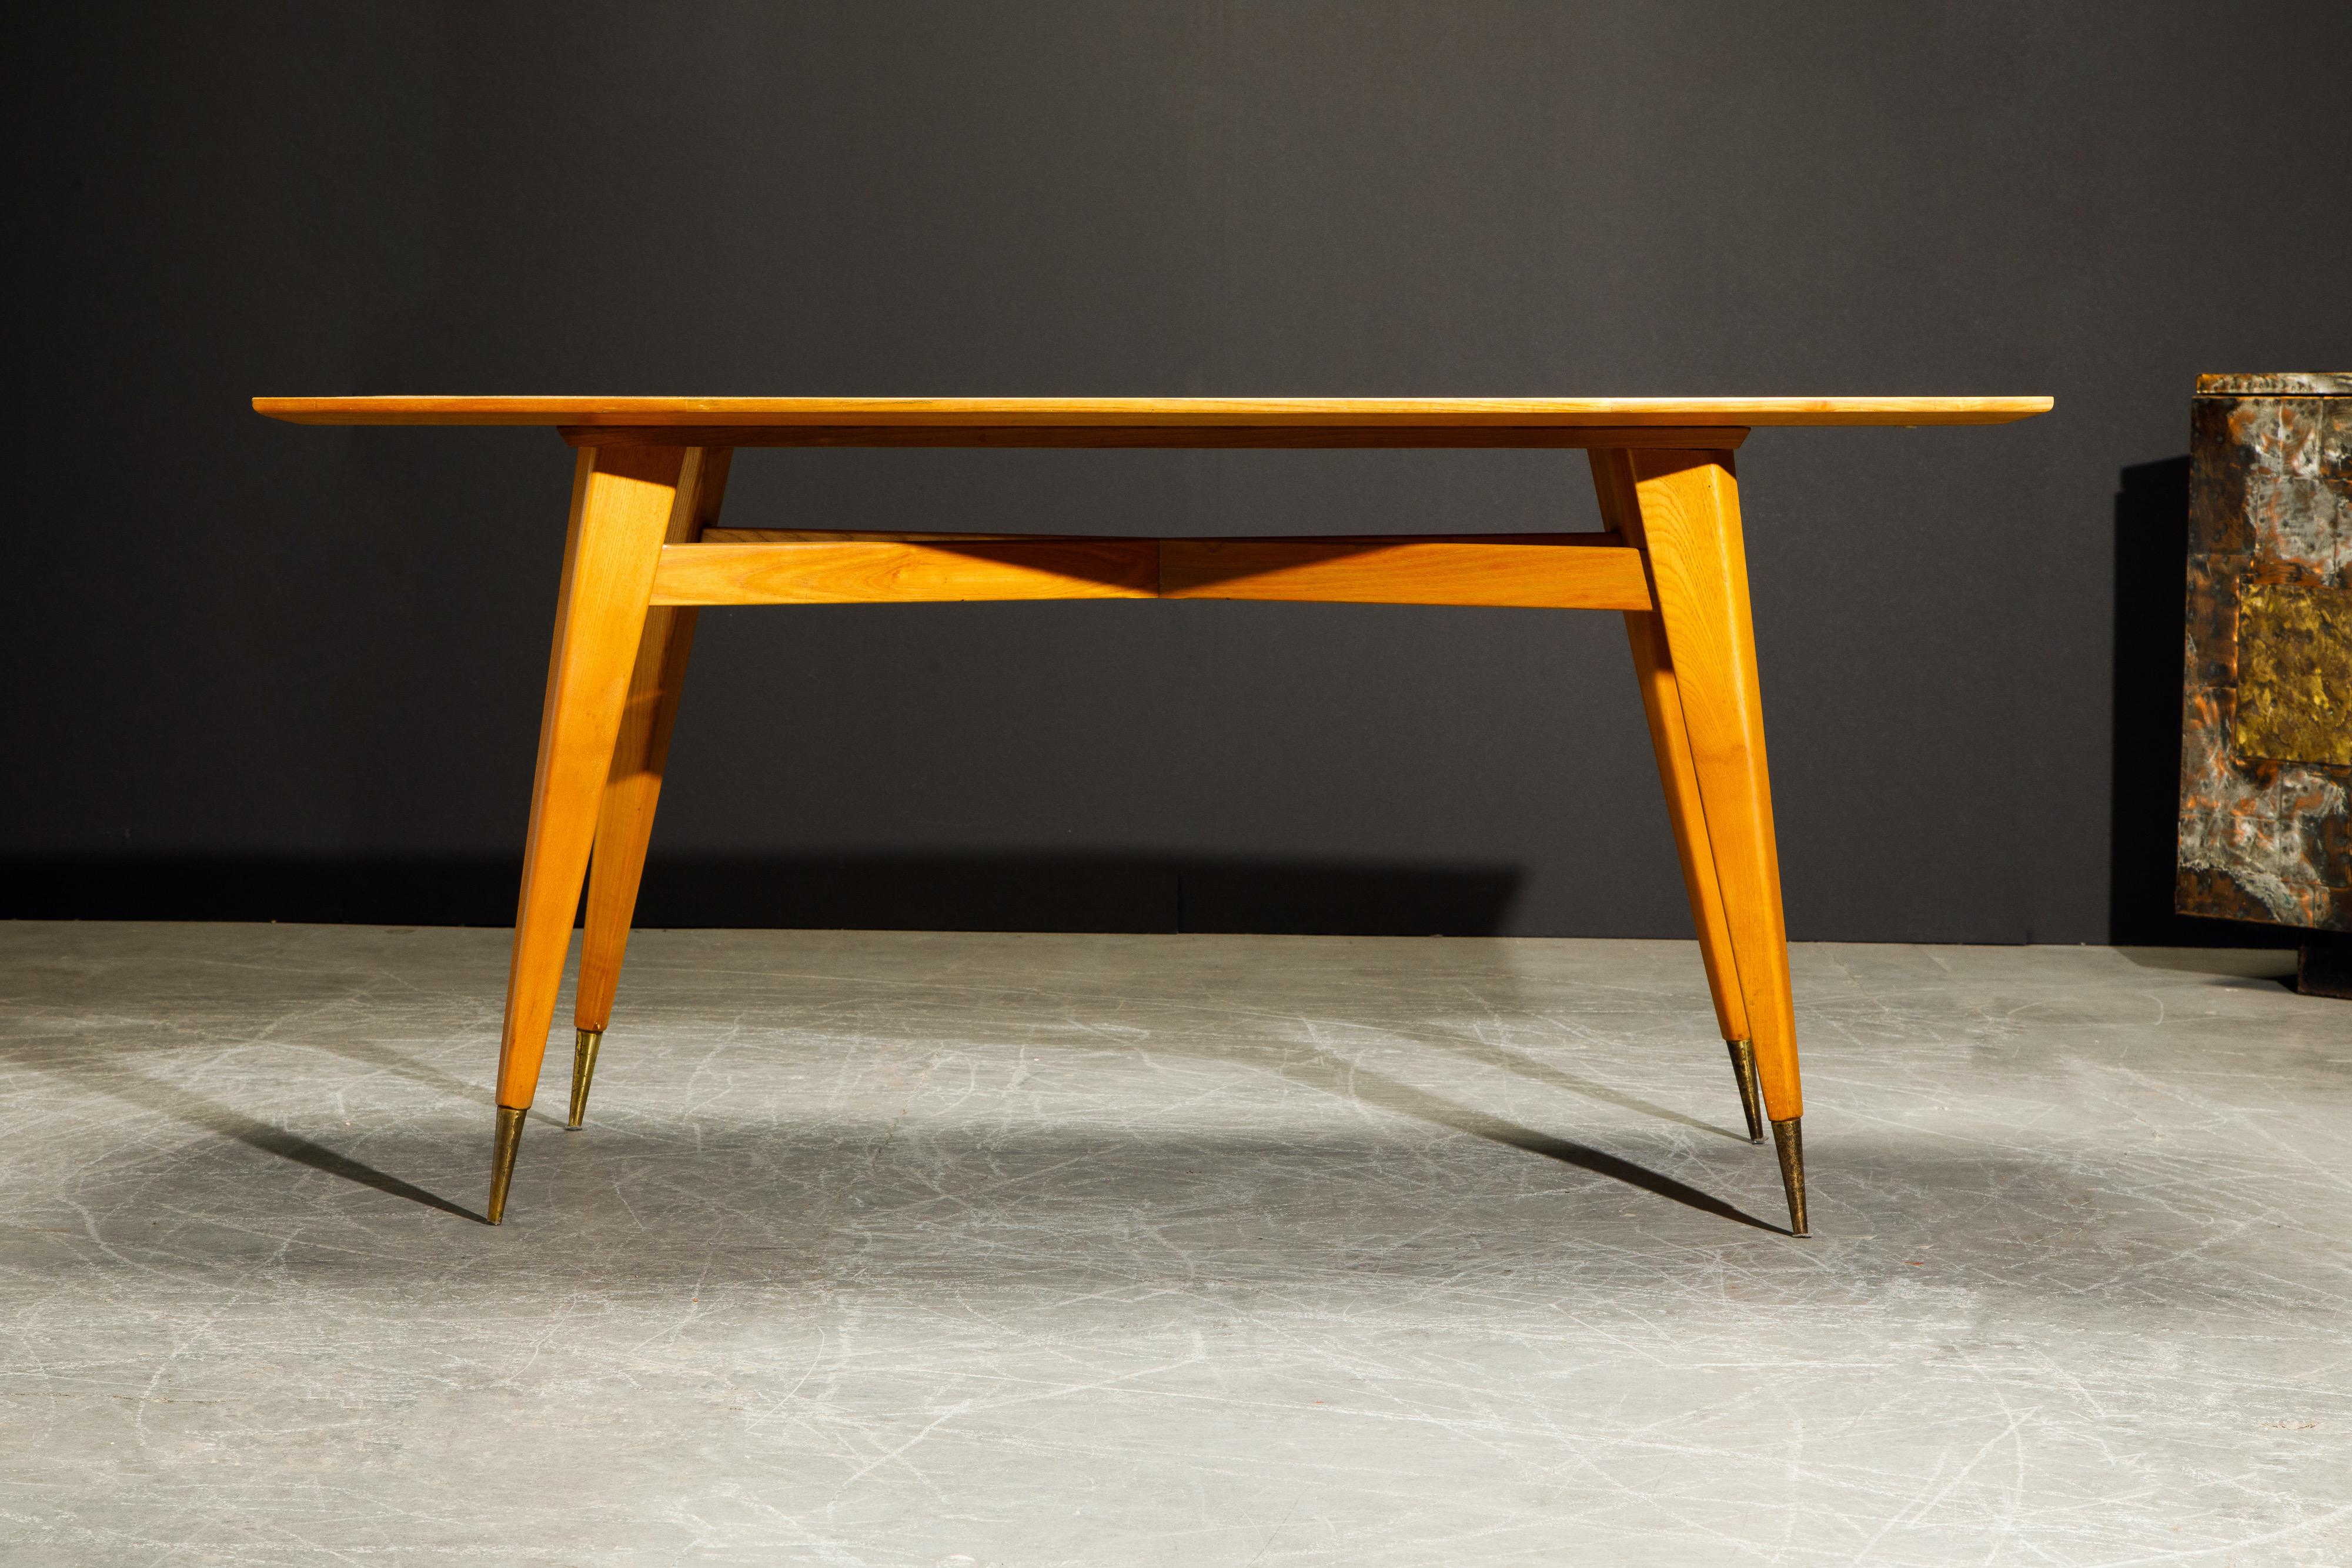 This incredible dining table by Gio Ponti, which also would serve excellently as a desk, has been reviewed by the Gio Ponti archives and a COE (Certificate of Expertise) was created for this beautiful table. A digital copy of this COE will be